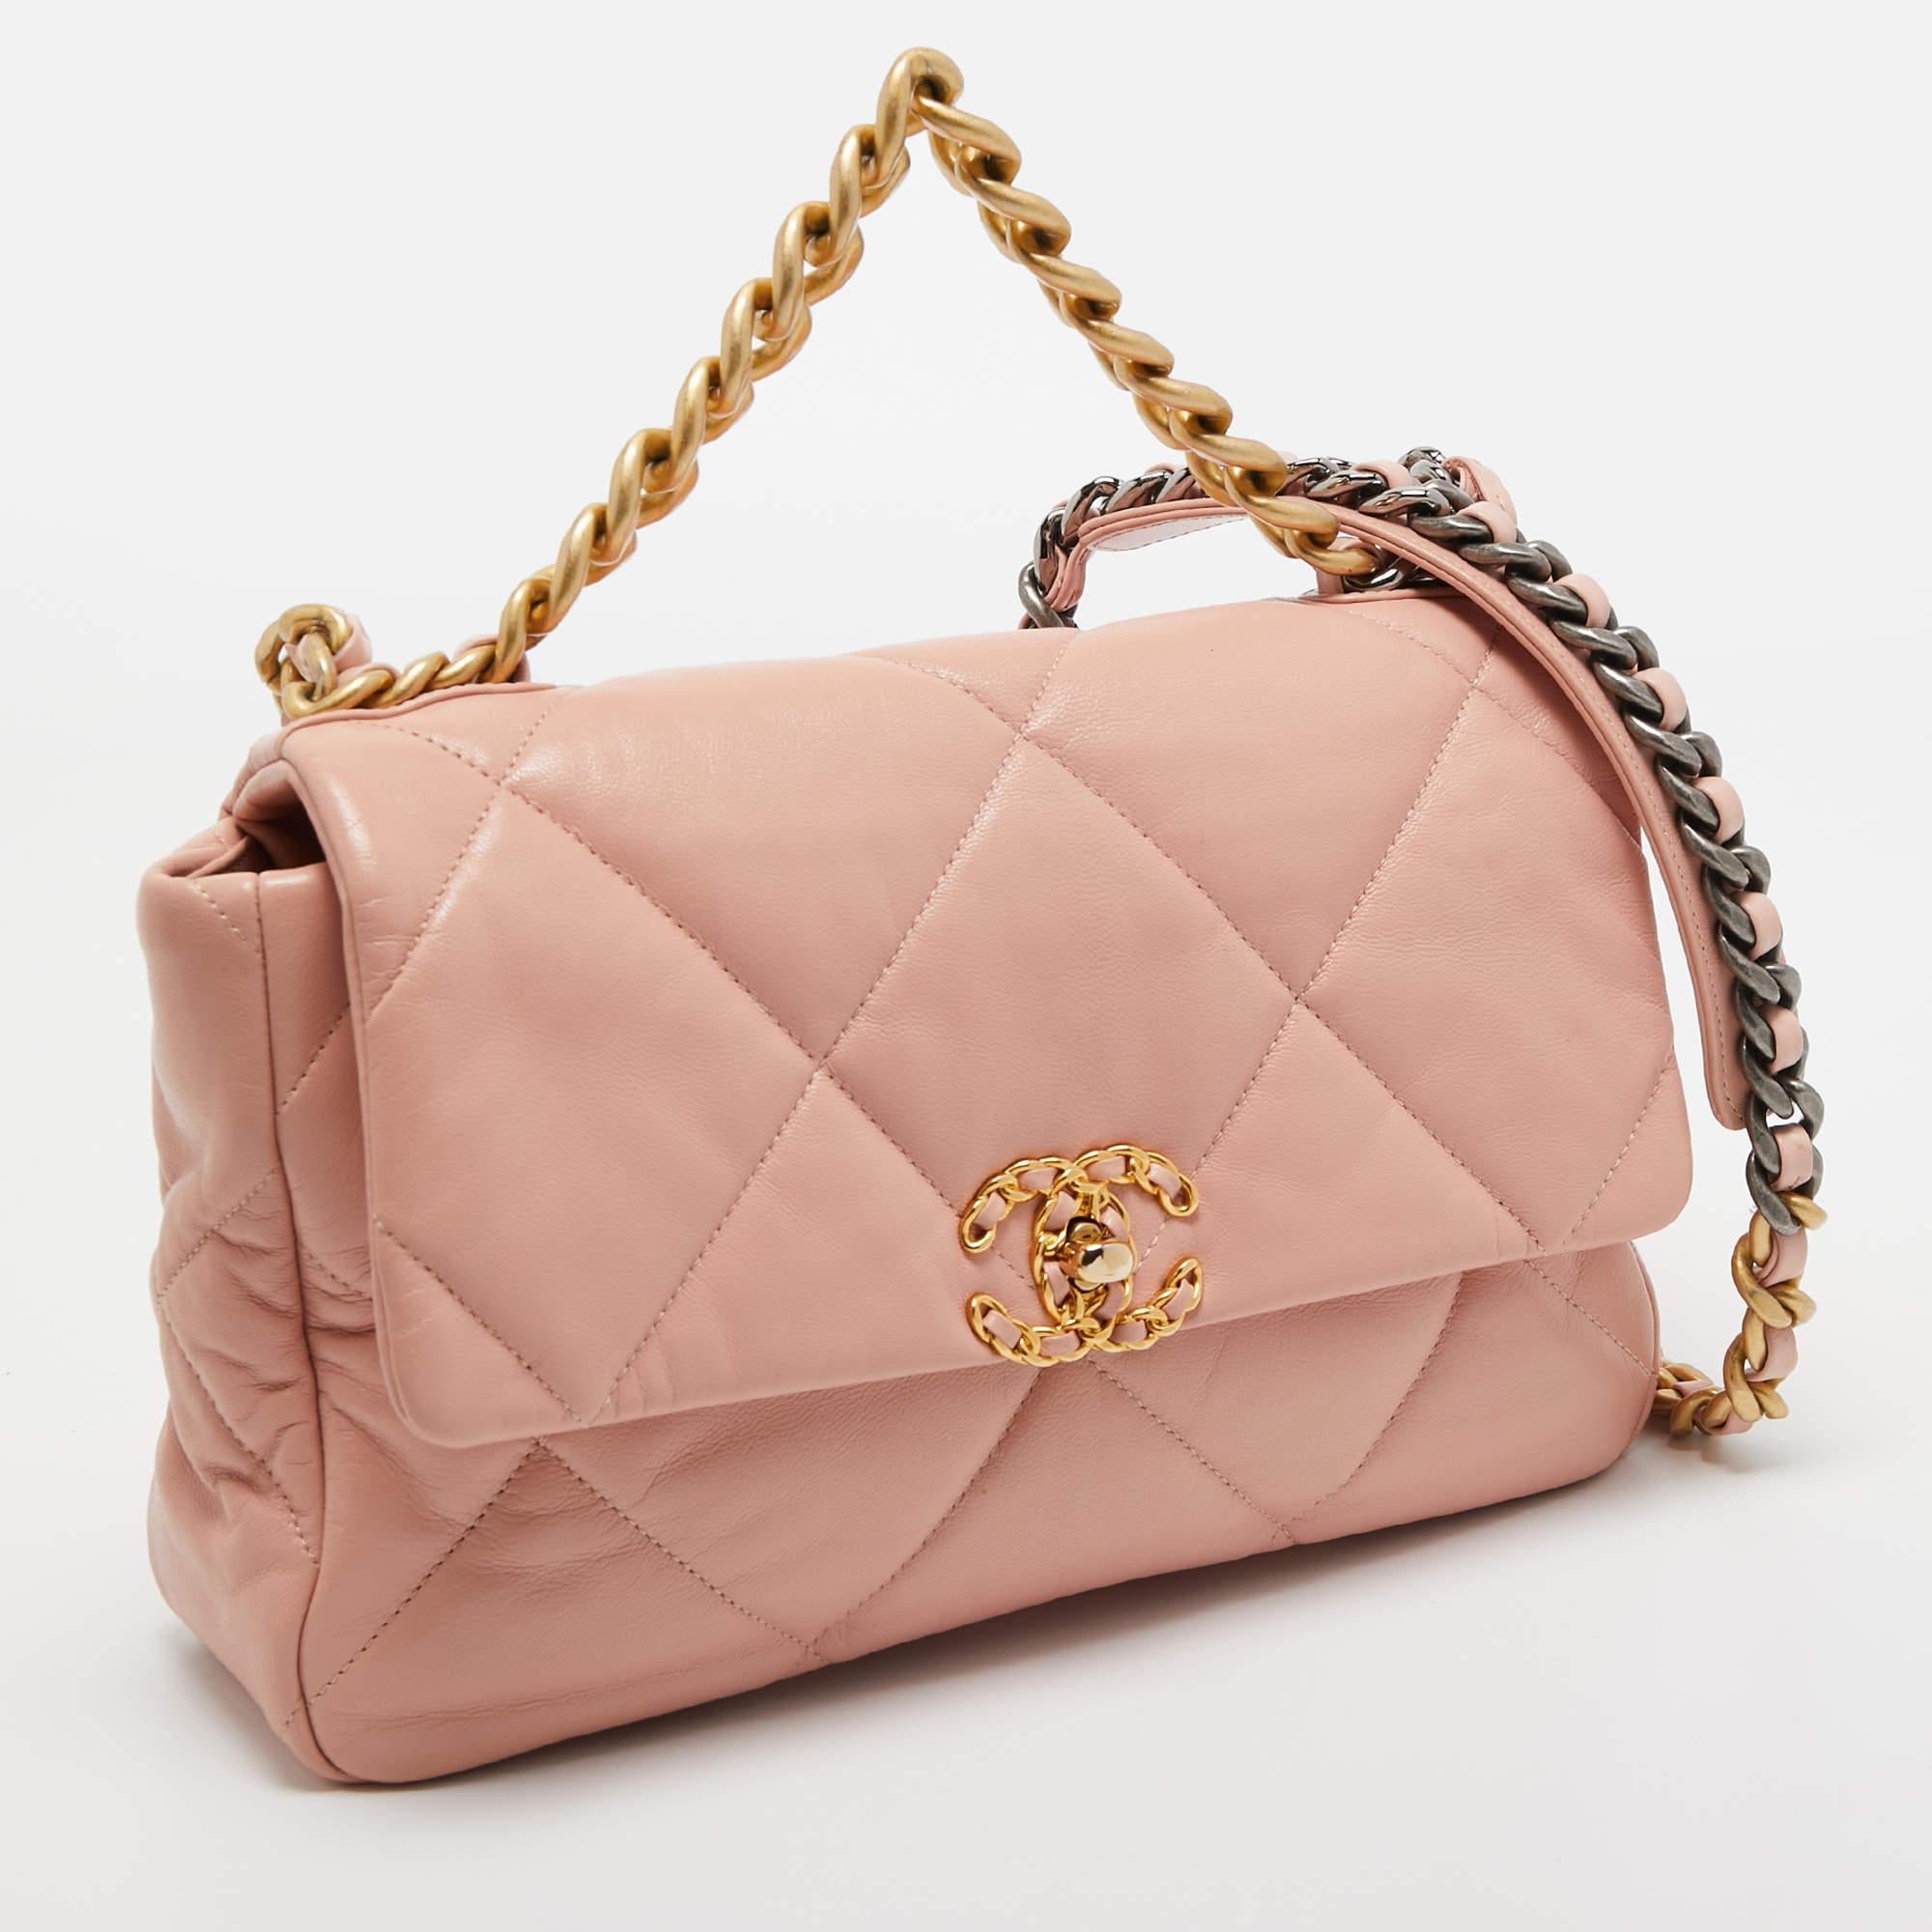 Women's Chanel Pink Quilted Leather Large 19 Flap Bag